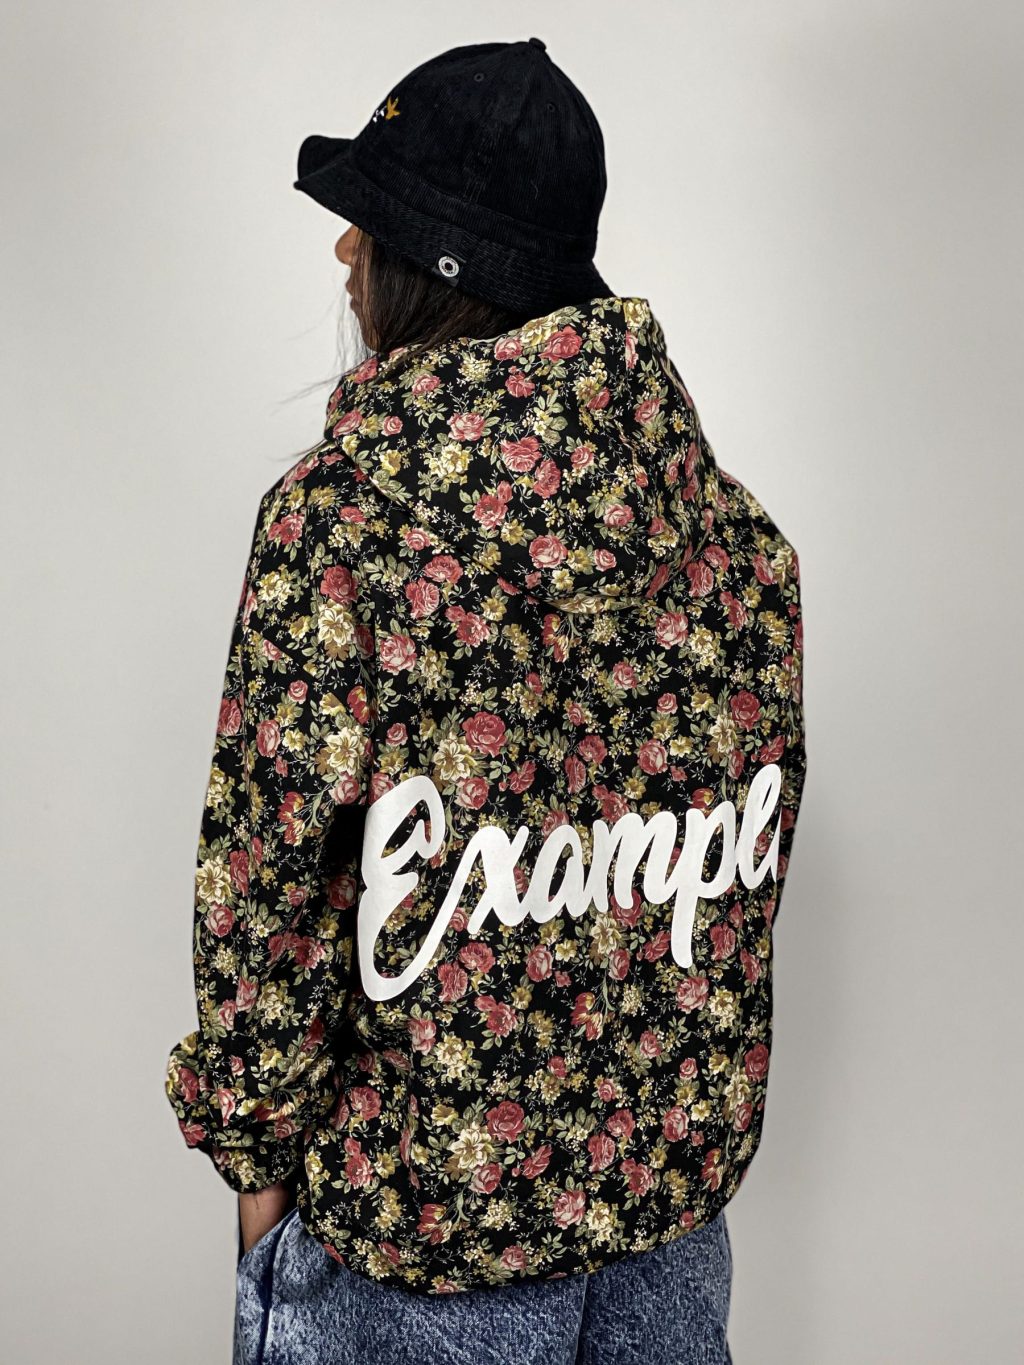 example-20ss-lookbook-launch-20200222